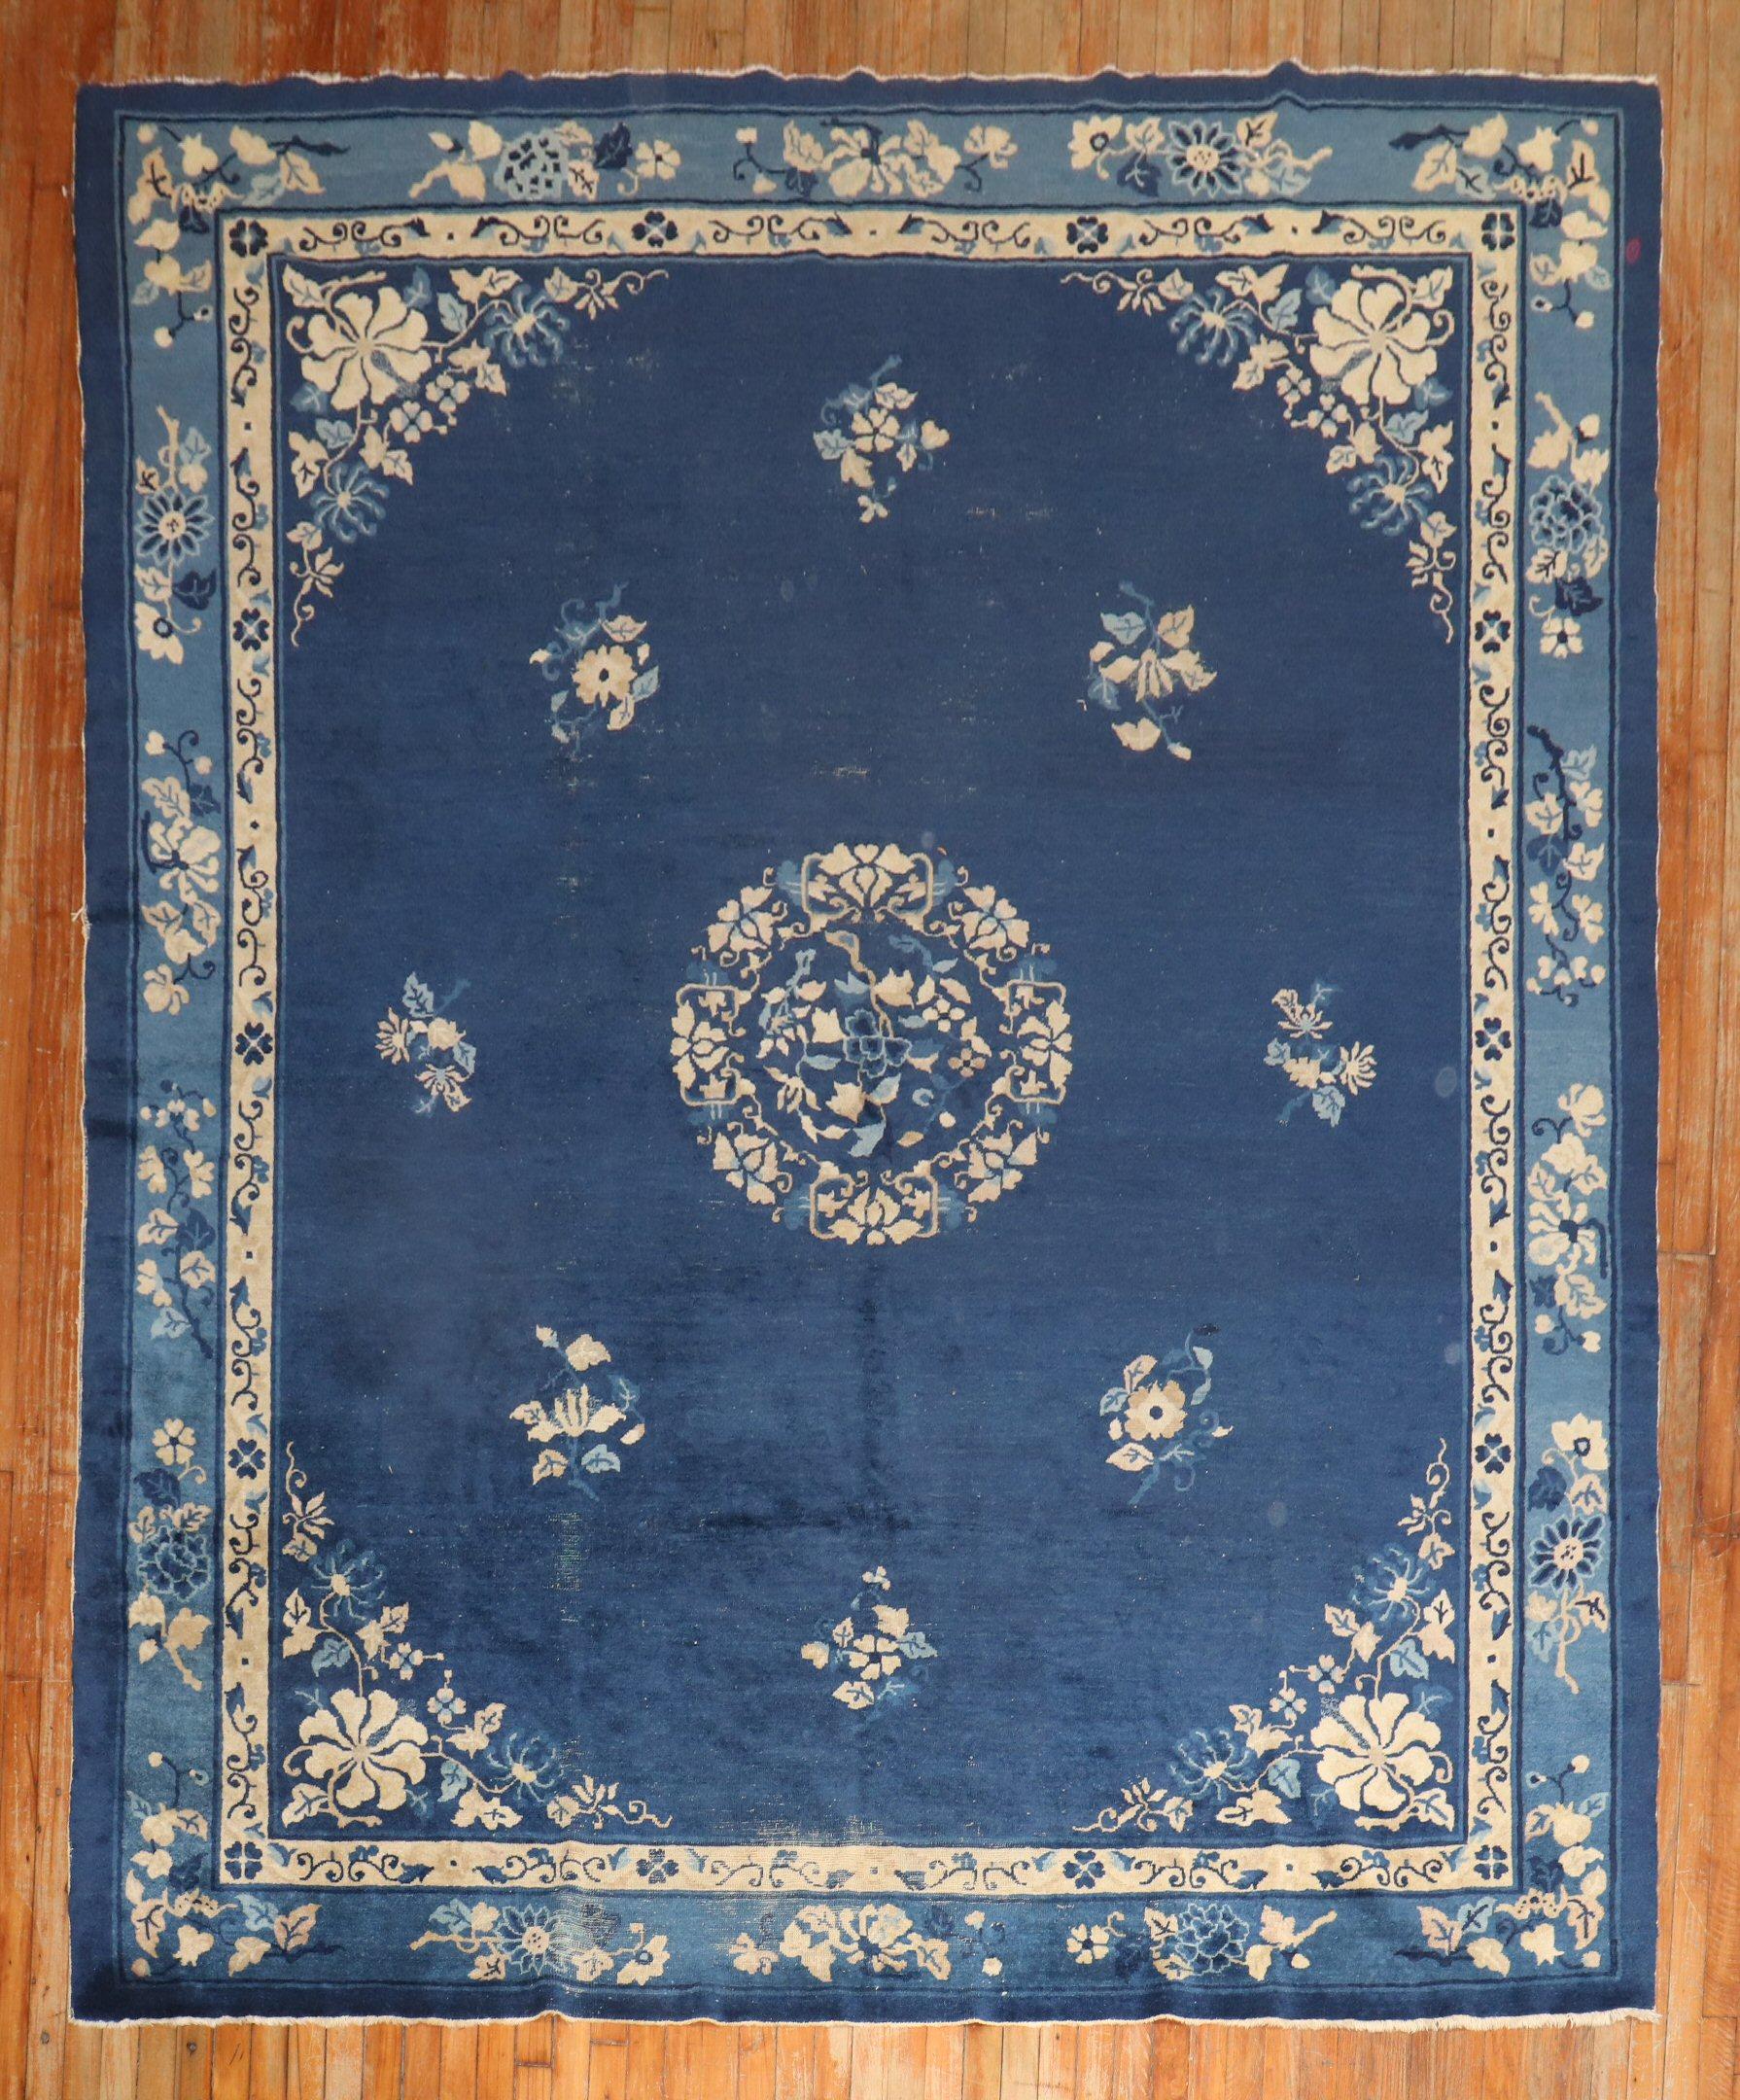 
A 2nd quarter of the 20th century blue Chinese Peking worn rug

Measures: 8' x 9'7